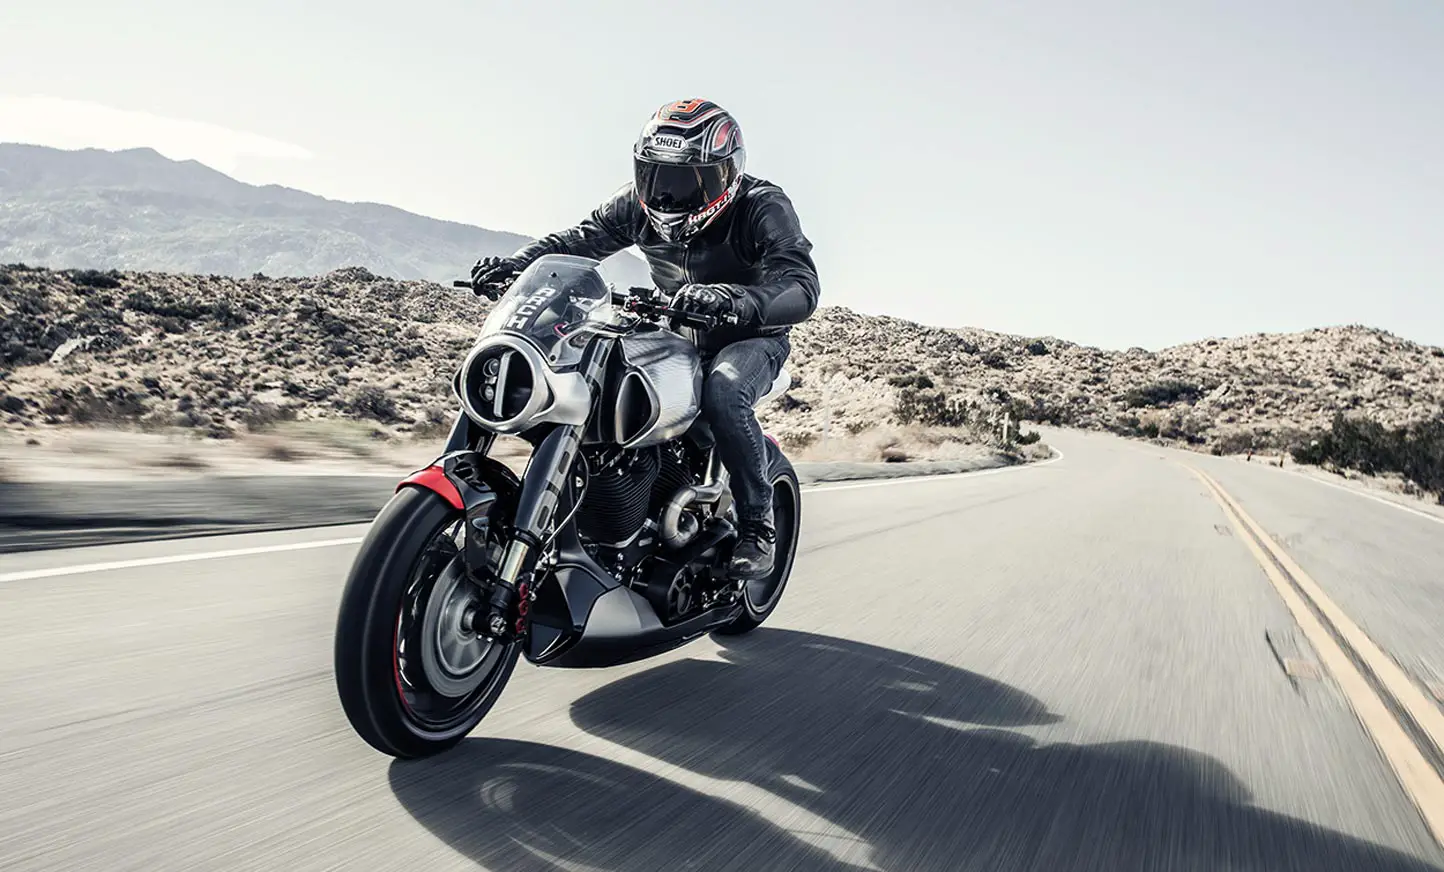 Motul oil expands bespoke innovation partnership with ARCH Motorcycle • Total Motorcycle